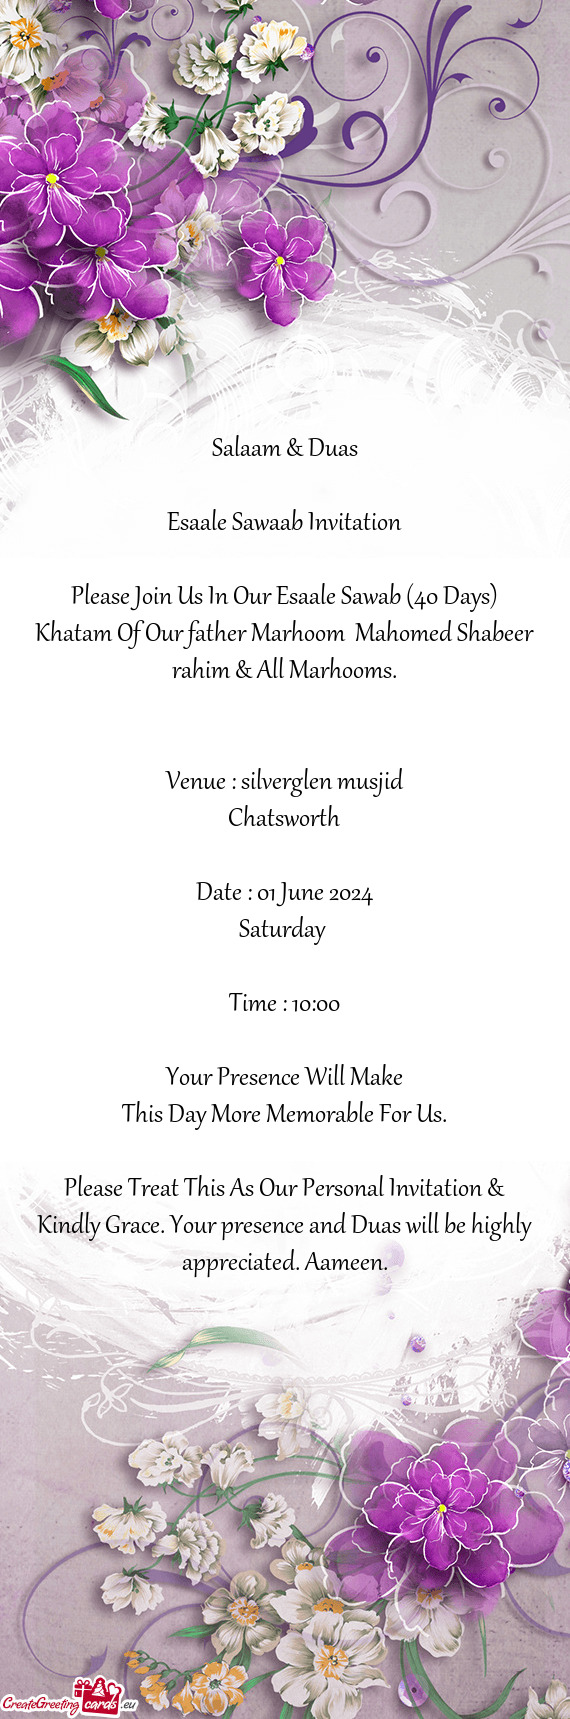 Please Join Us In Our Esaale Sawab (40 Days) Khatam Of Our father Marhoom Mahomed Shabeer rahim & A